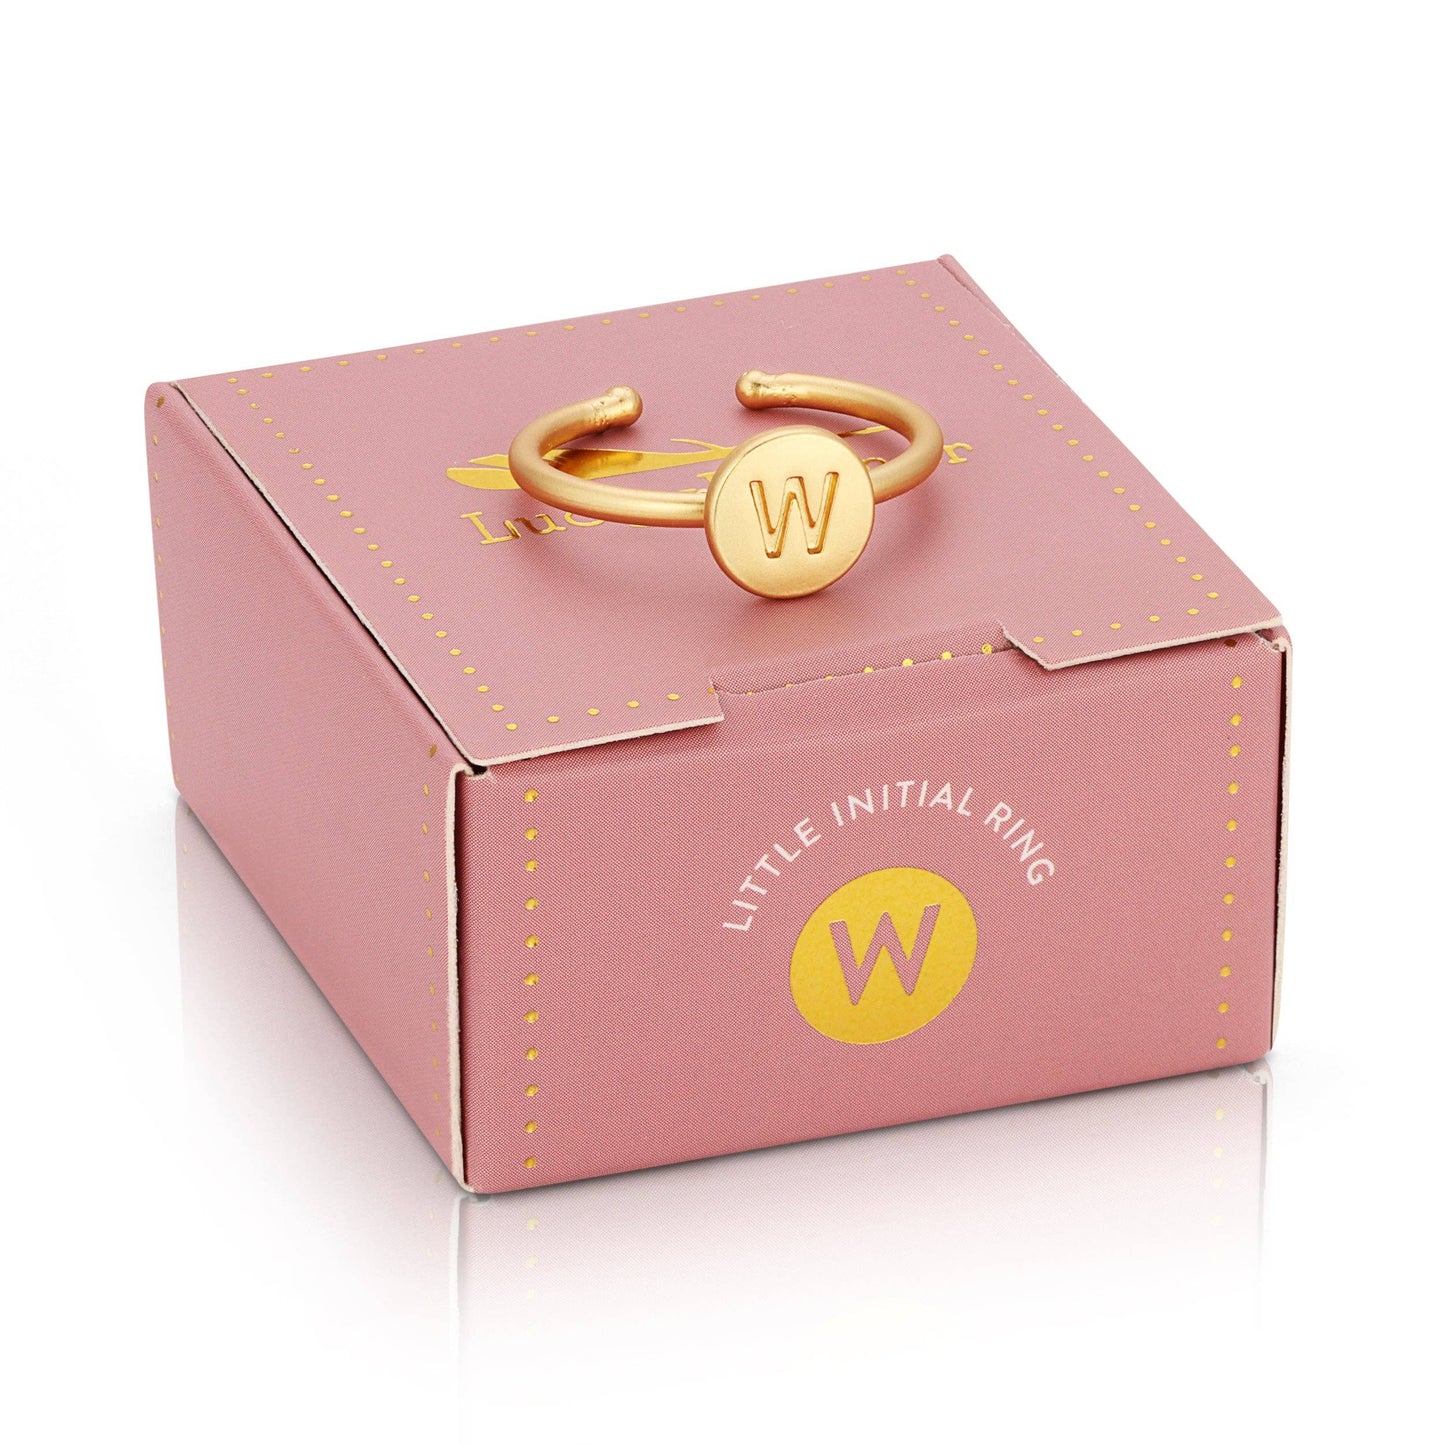 Initial Ring Ring - small box - W